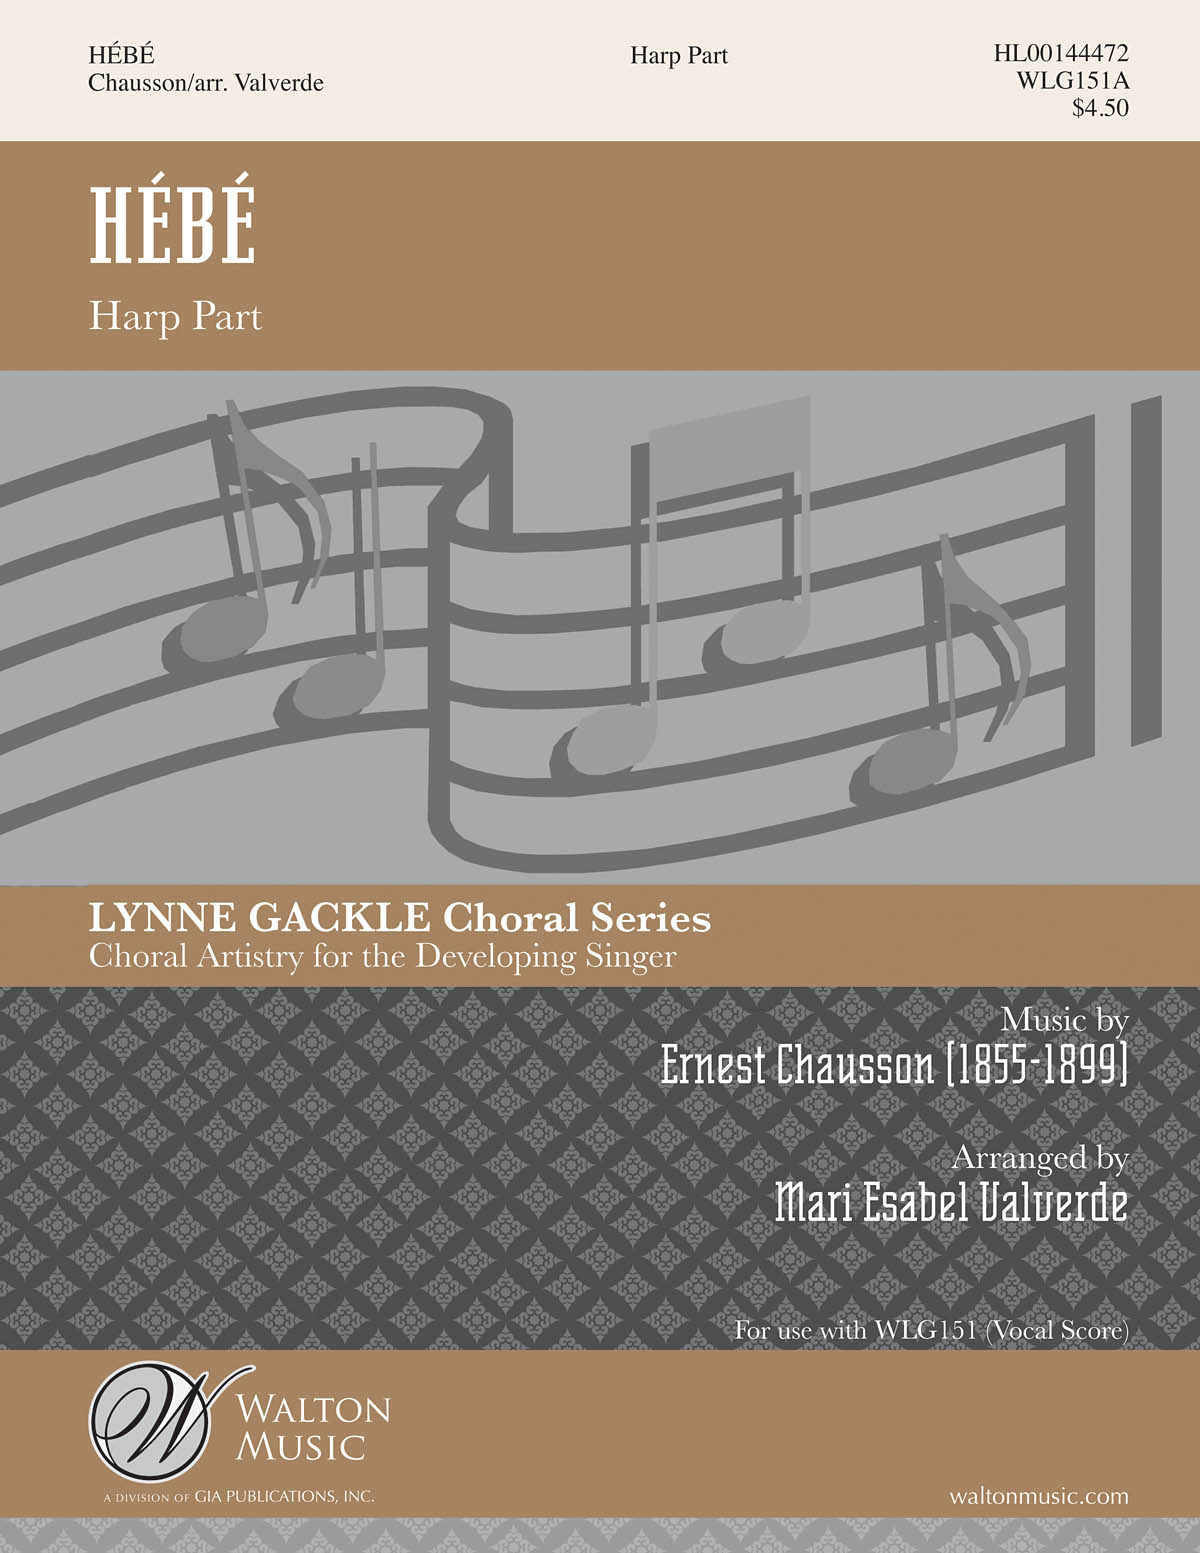 Ernest Chausson: Hb: Upper Voices and Accomp.: Vocal Score